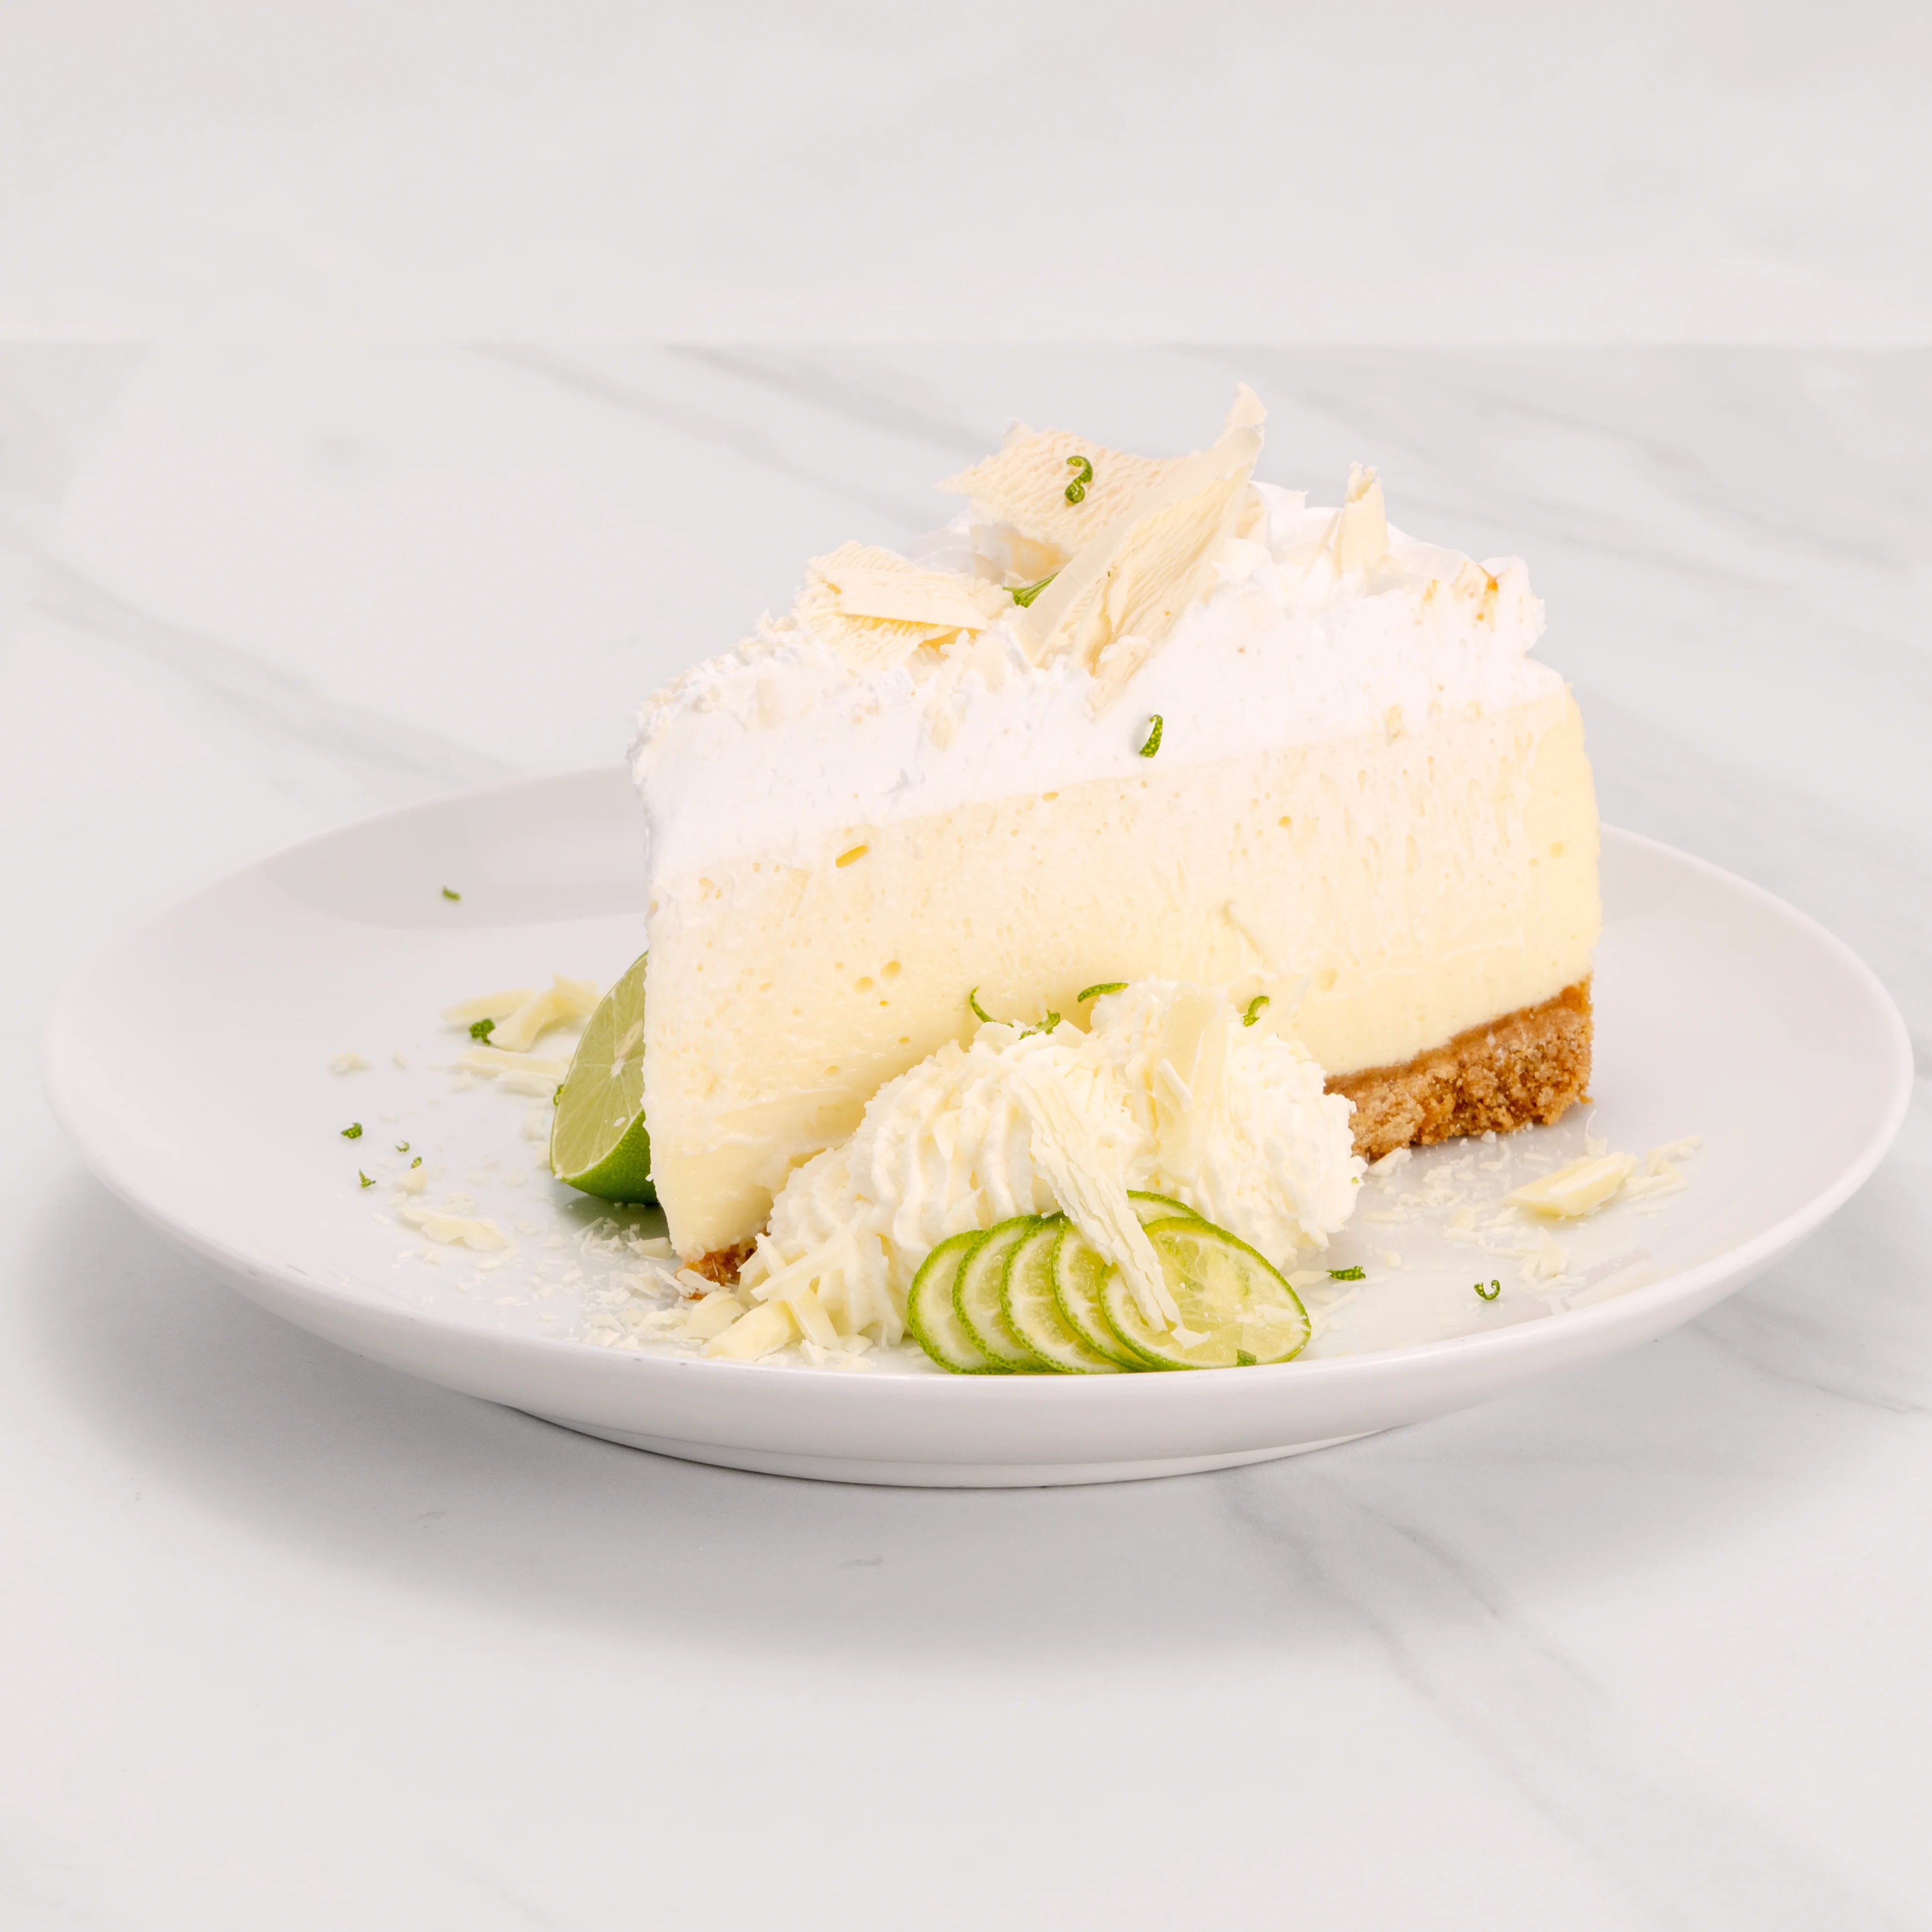 Slice of Gluten Free Key Lime White Chocolate Crème Cake garnished with lime, white chocolate, and a dollop of crème.